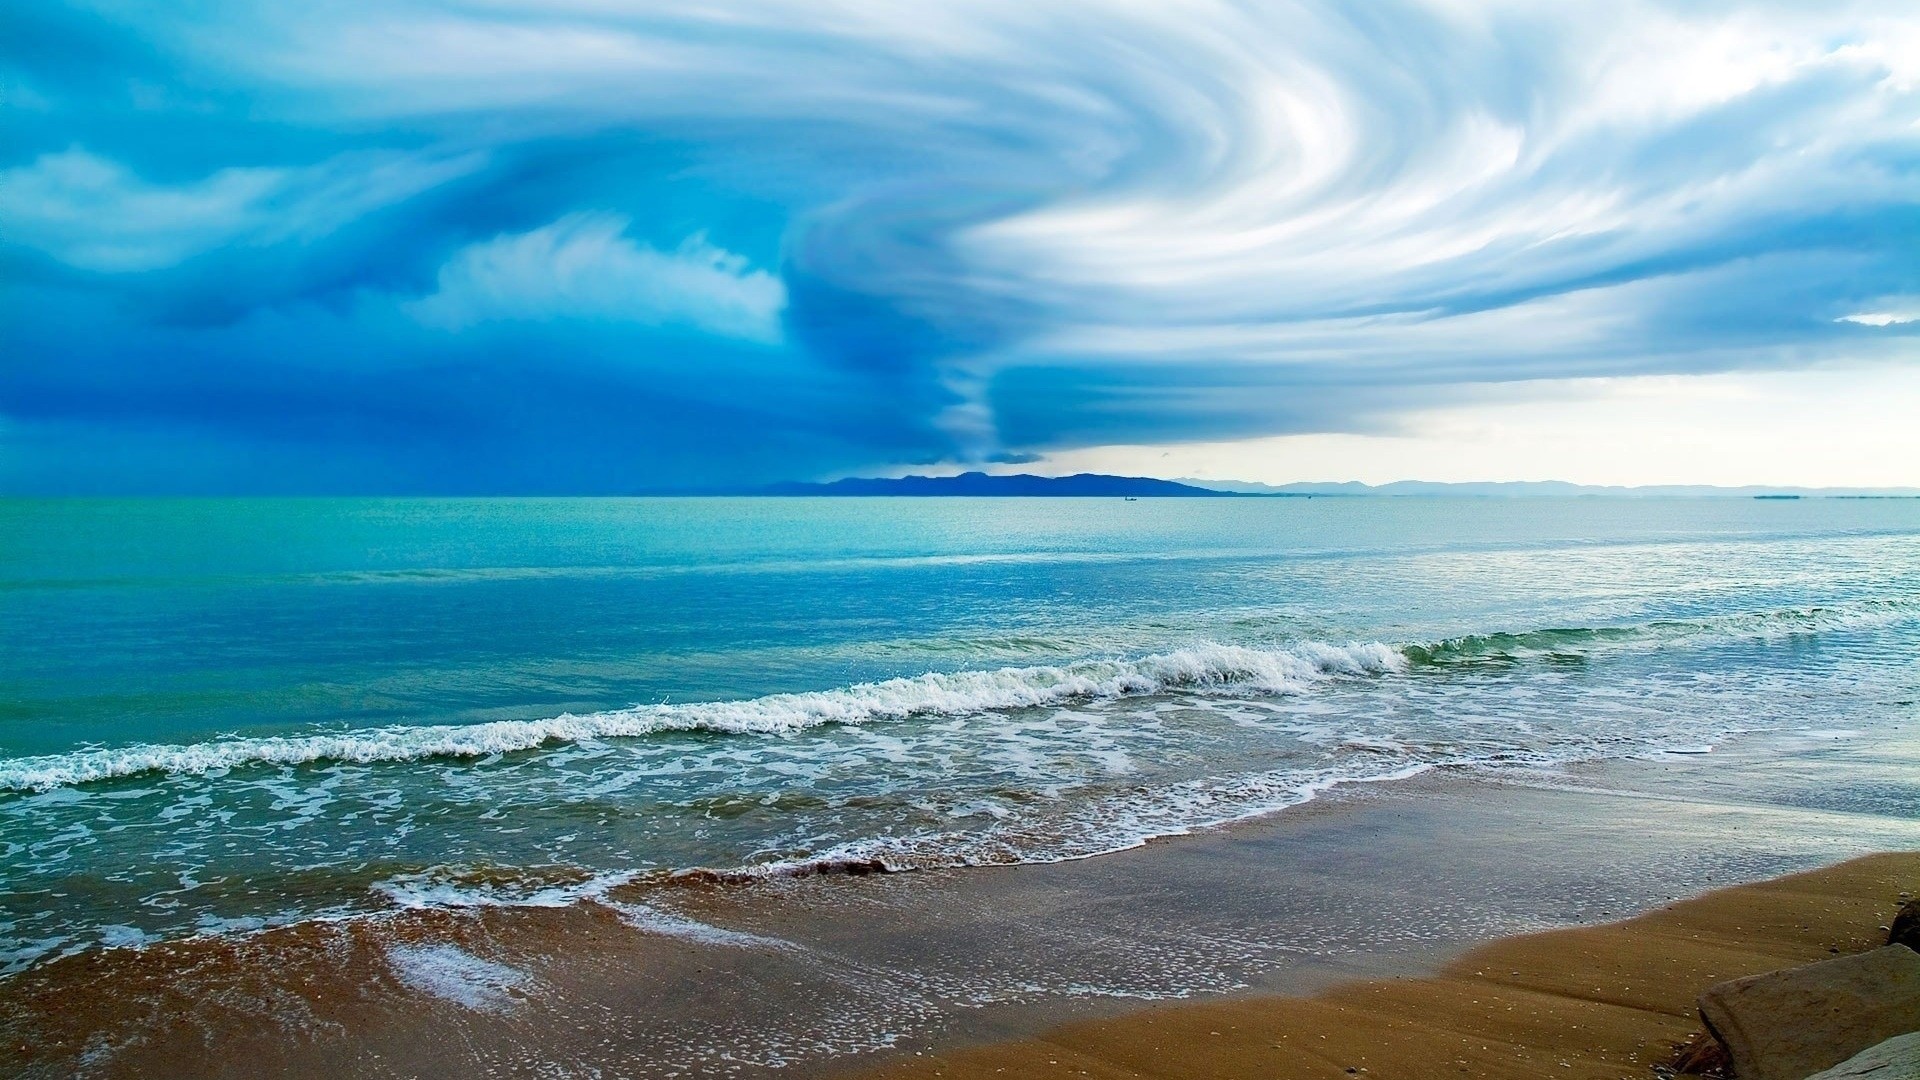 General 1920x1080 sea clouds beach waves nature sky storm